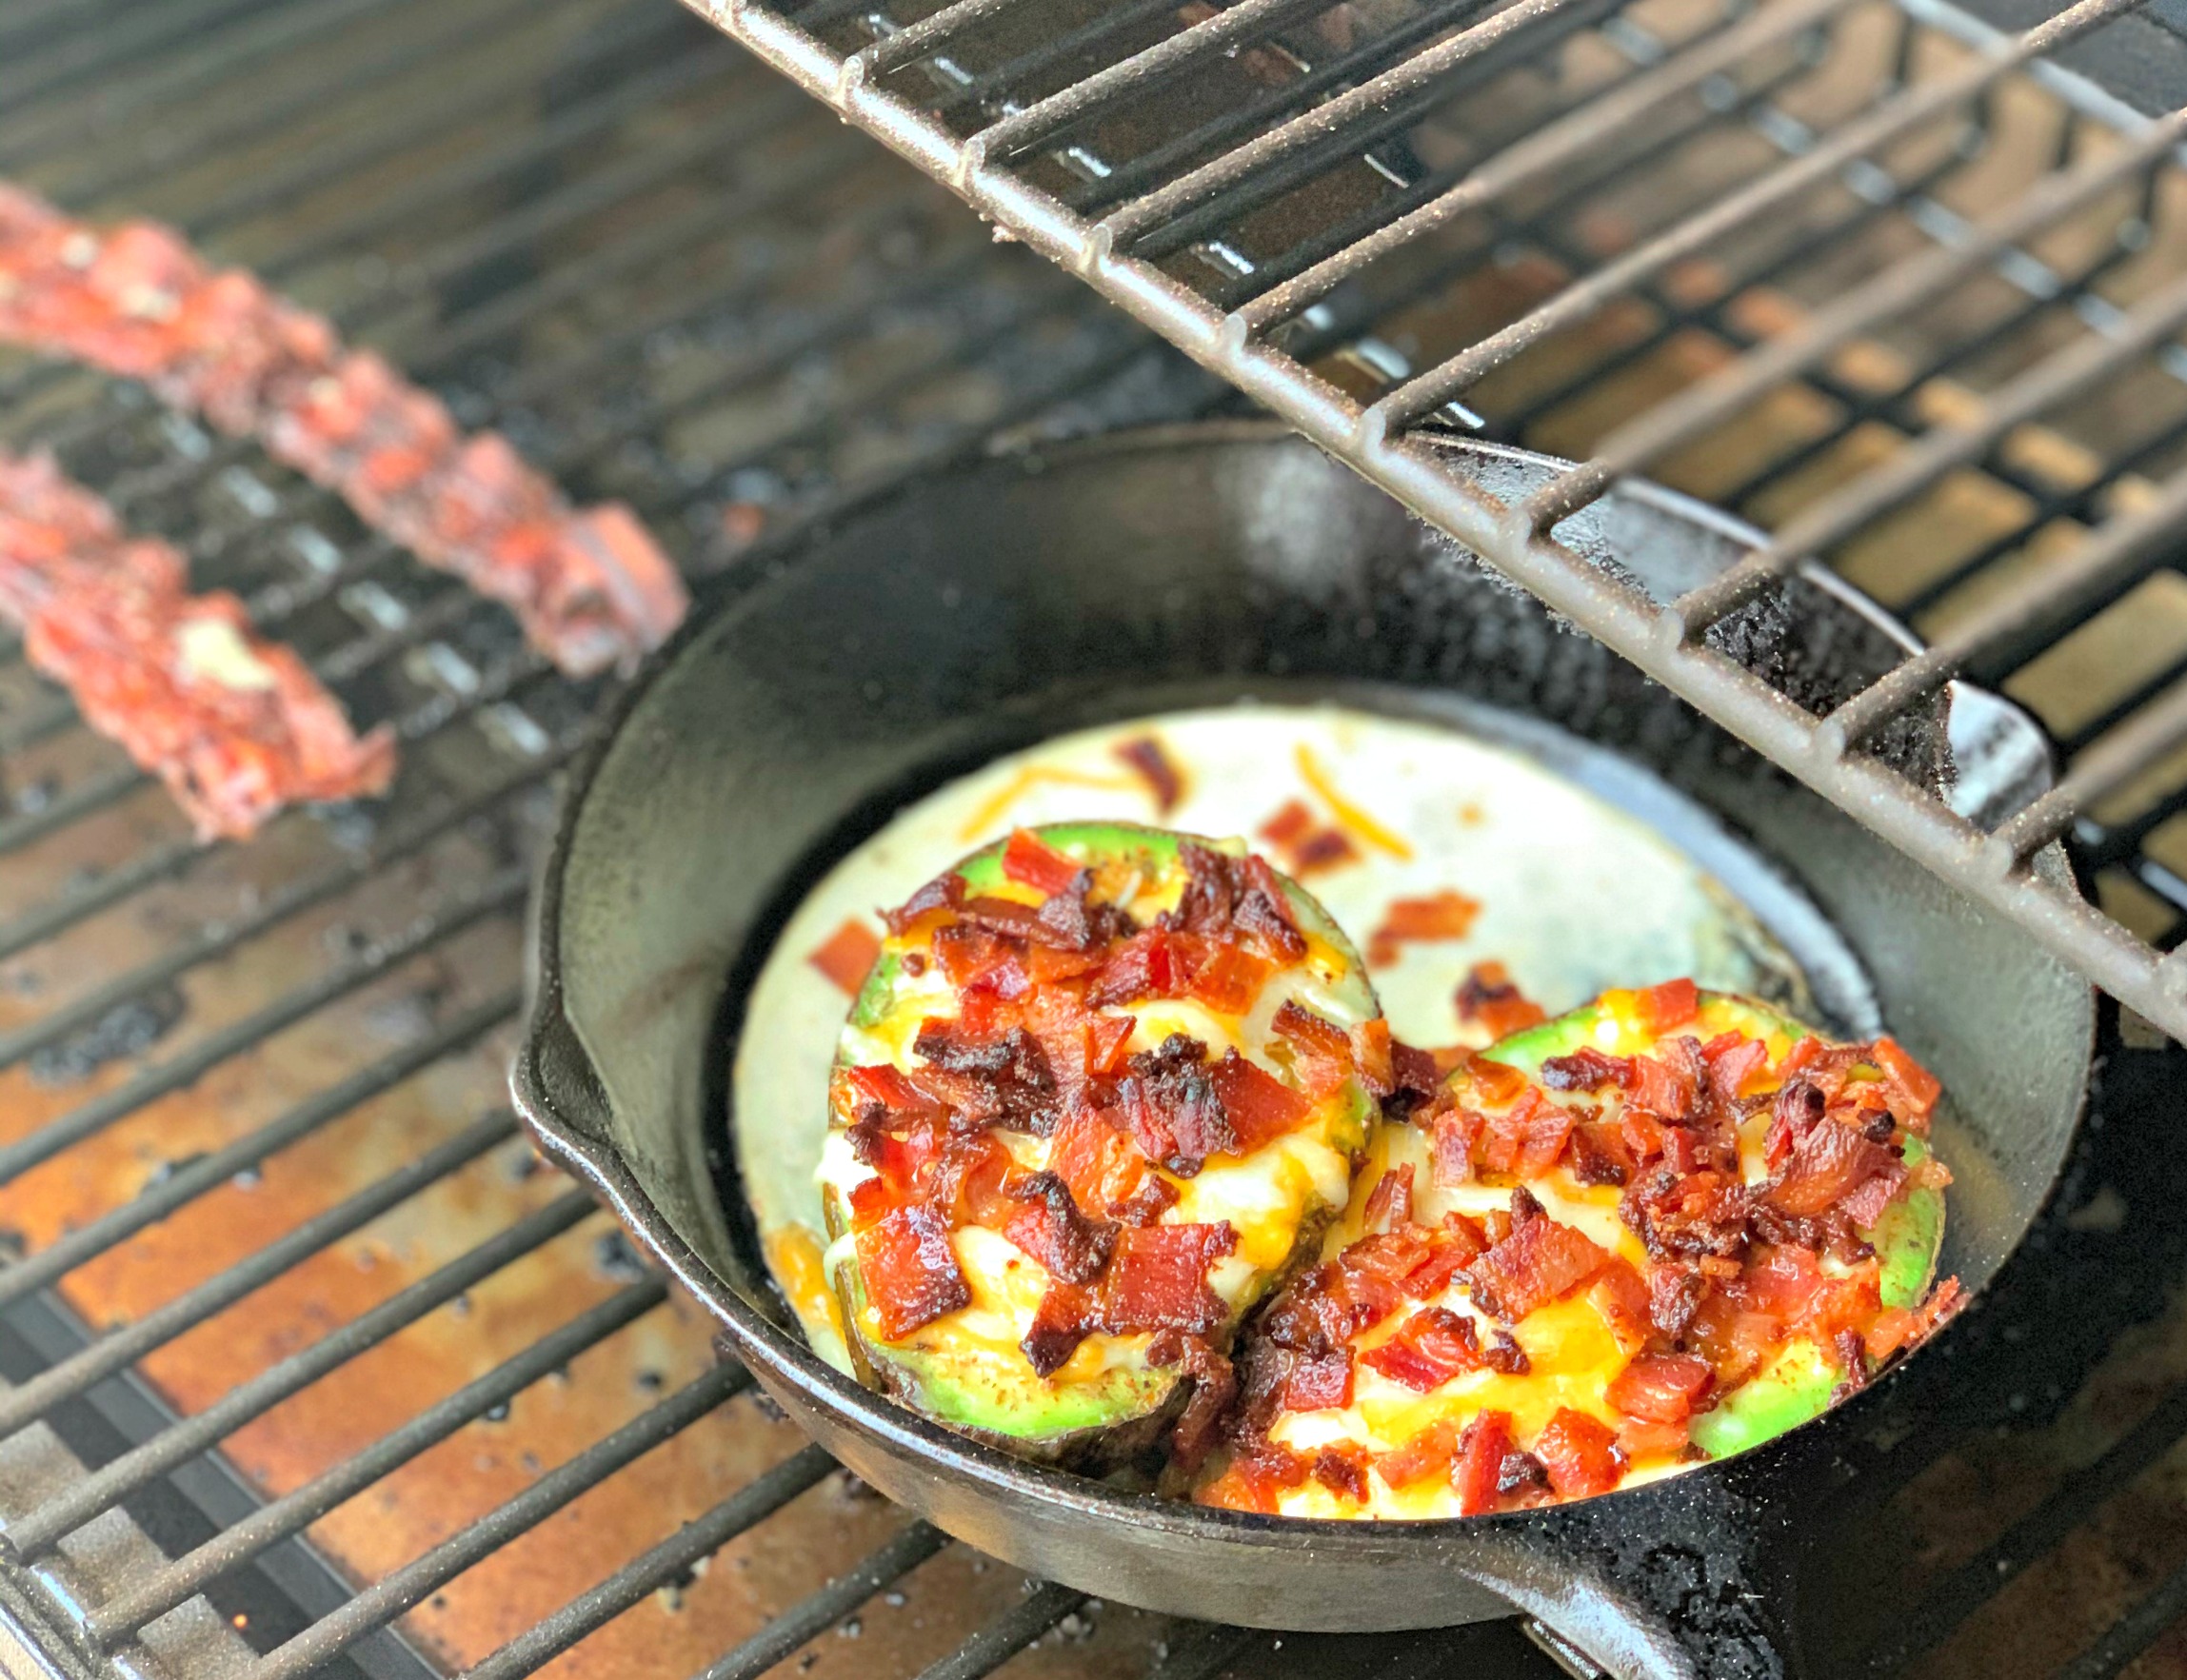 bacon, egg, and cheese stuffed avocados cooking in a cast iron skillet on the grill.